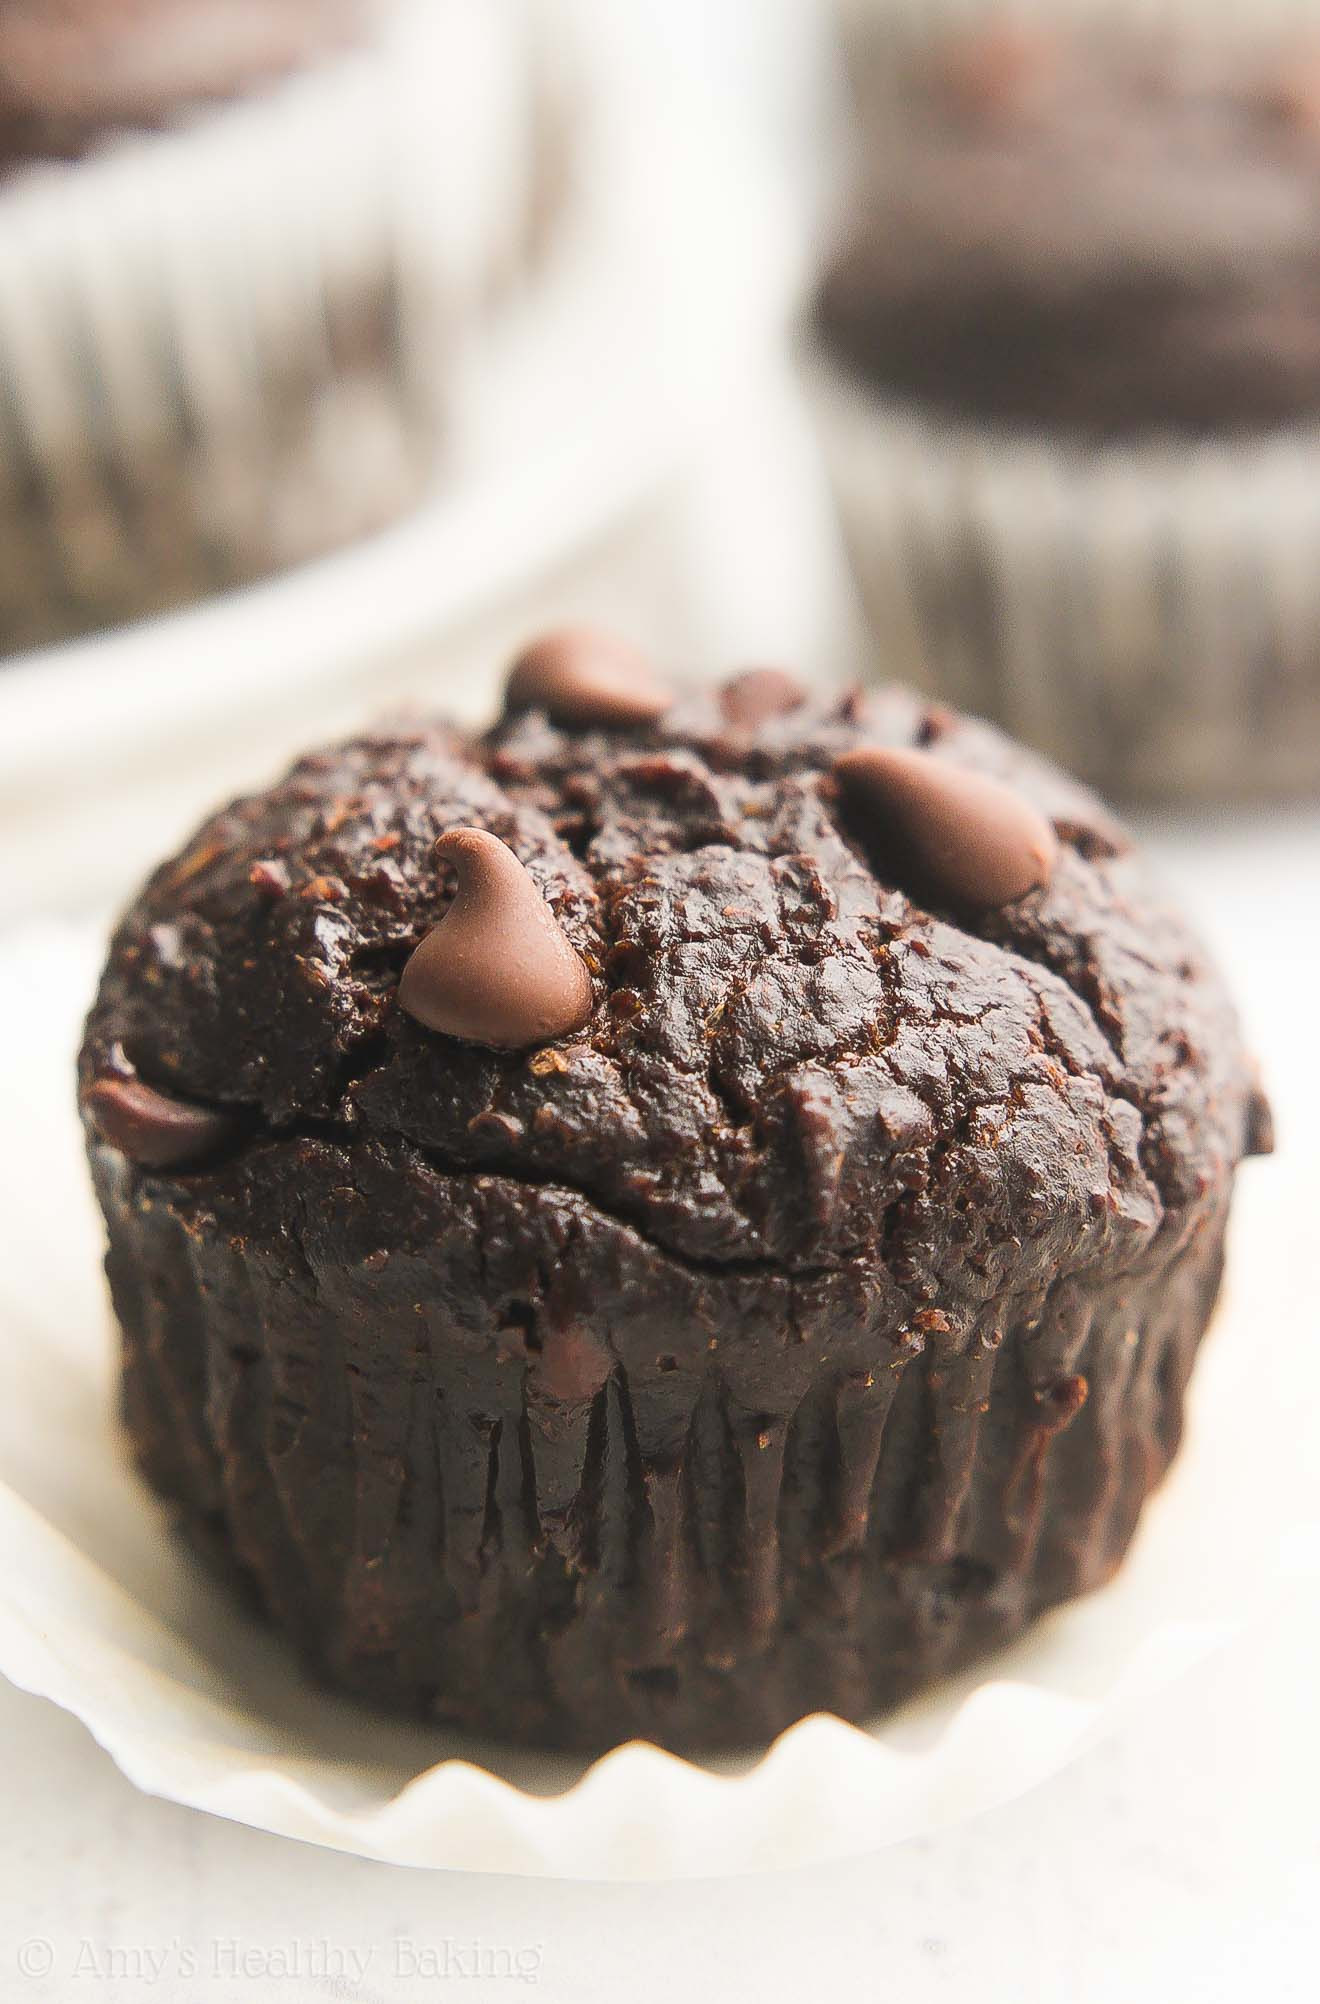 Low Calorie Chocolate Chip Muffins
 The Ultimate Healthy Chocolate Mini Muffins